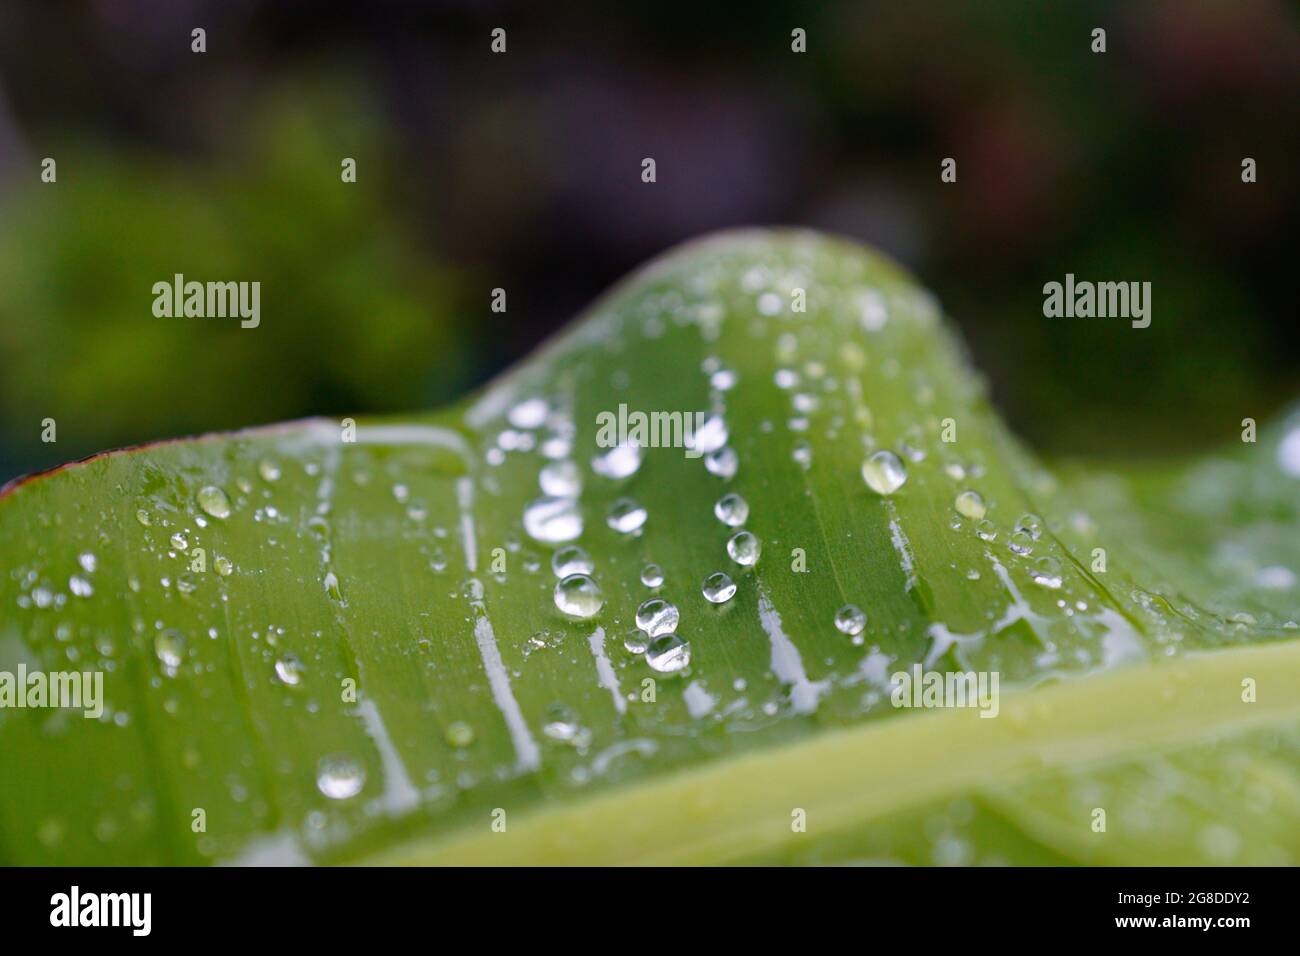 Selective focus shot of water droplets on a green leaf Stock Photo